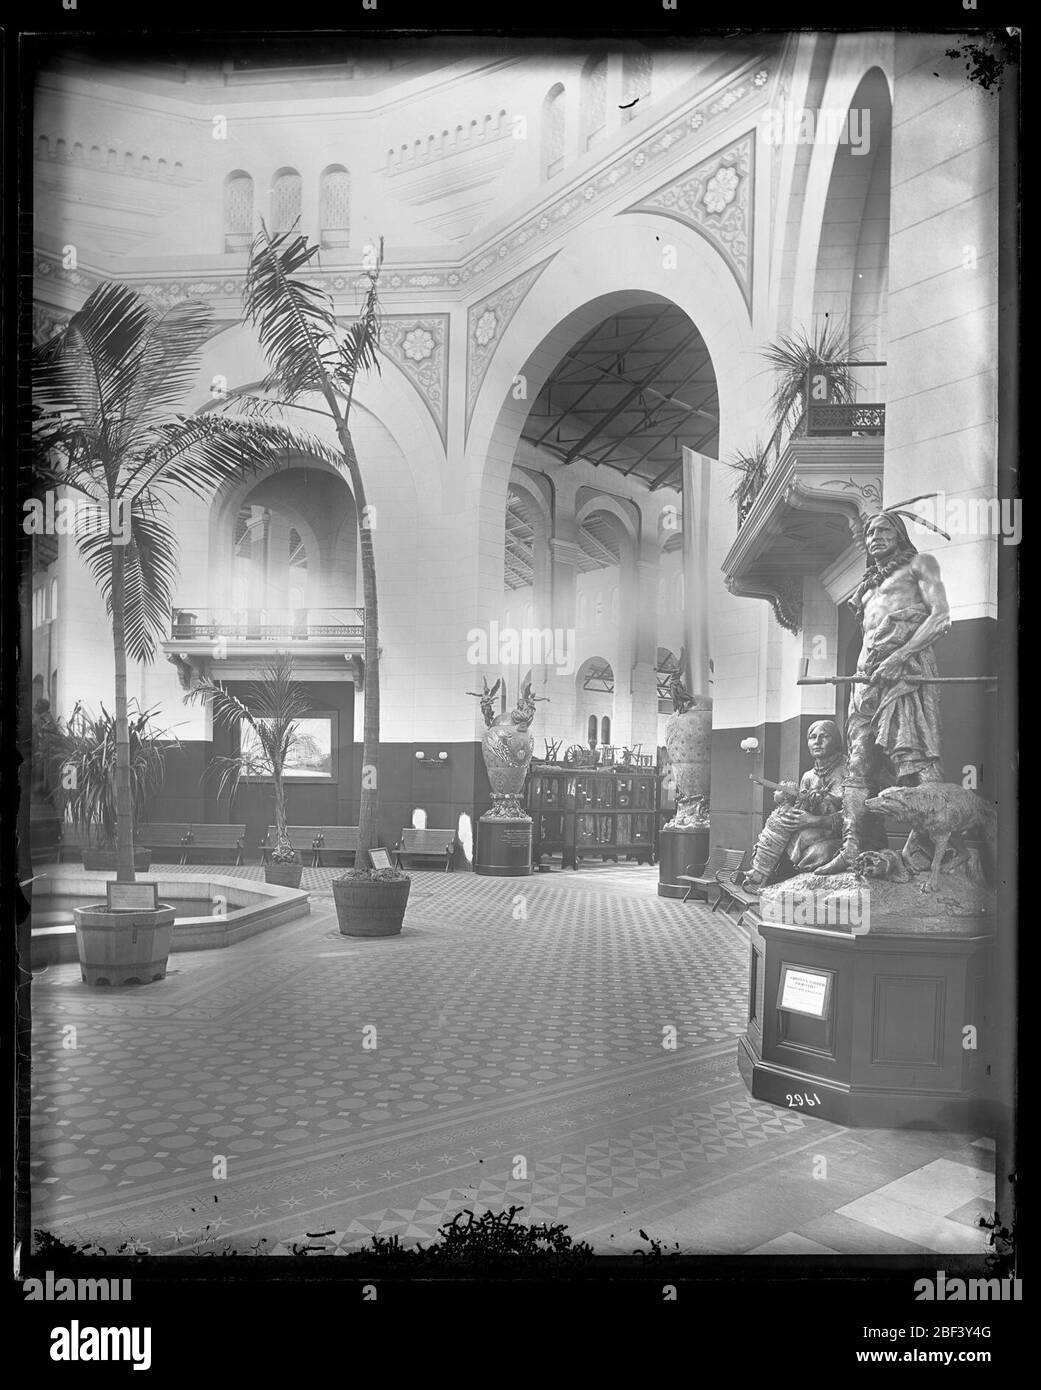 United States National Museum Rotunda. Also known as 2961.See also Record Unit 95, Box 32, Folder 35.Rotunda of the United States National Museum, now known as the Arts and Industries Building.Smithsonian Institution Archives, Acc. 11-007, Box 013, Image No. Stock Photo